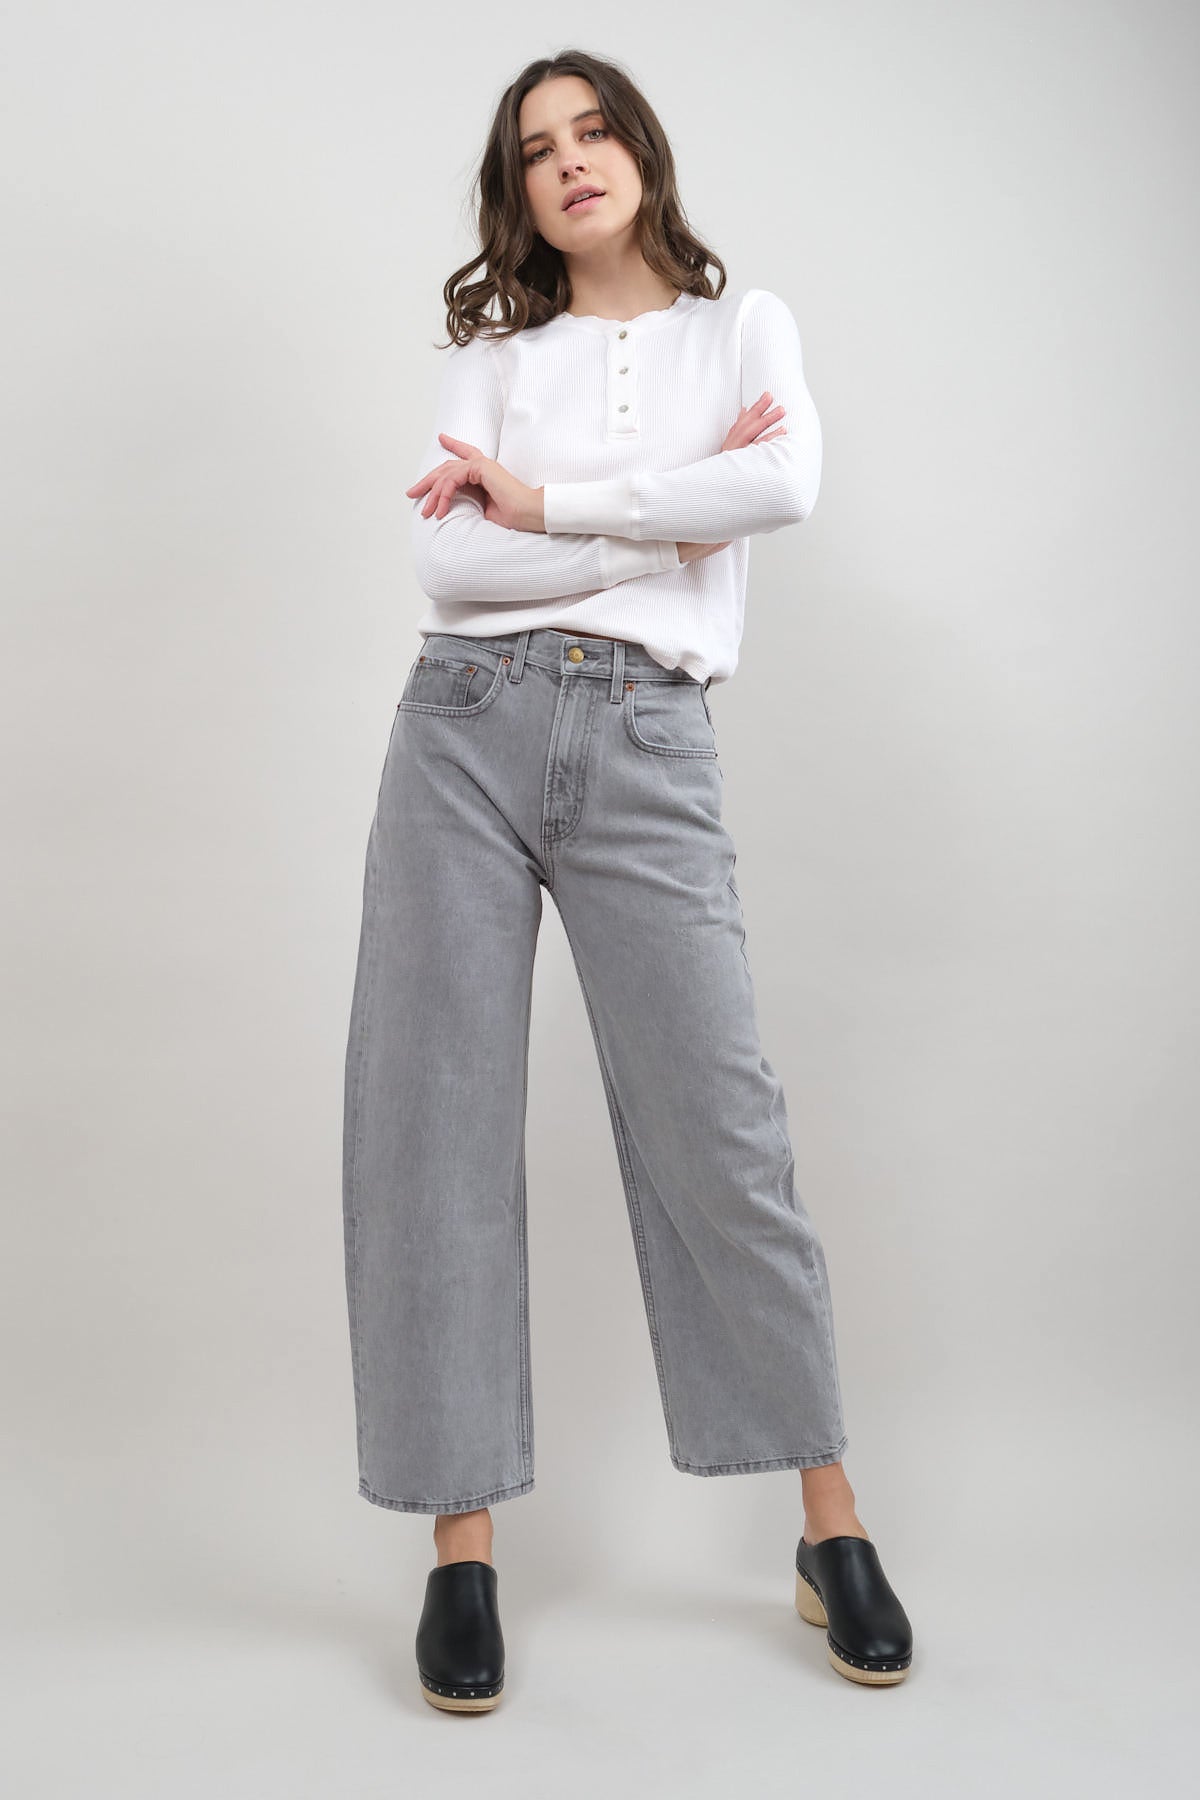 Leroy Mid Relaxed Bow Jean in Grey Stone Wash